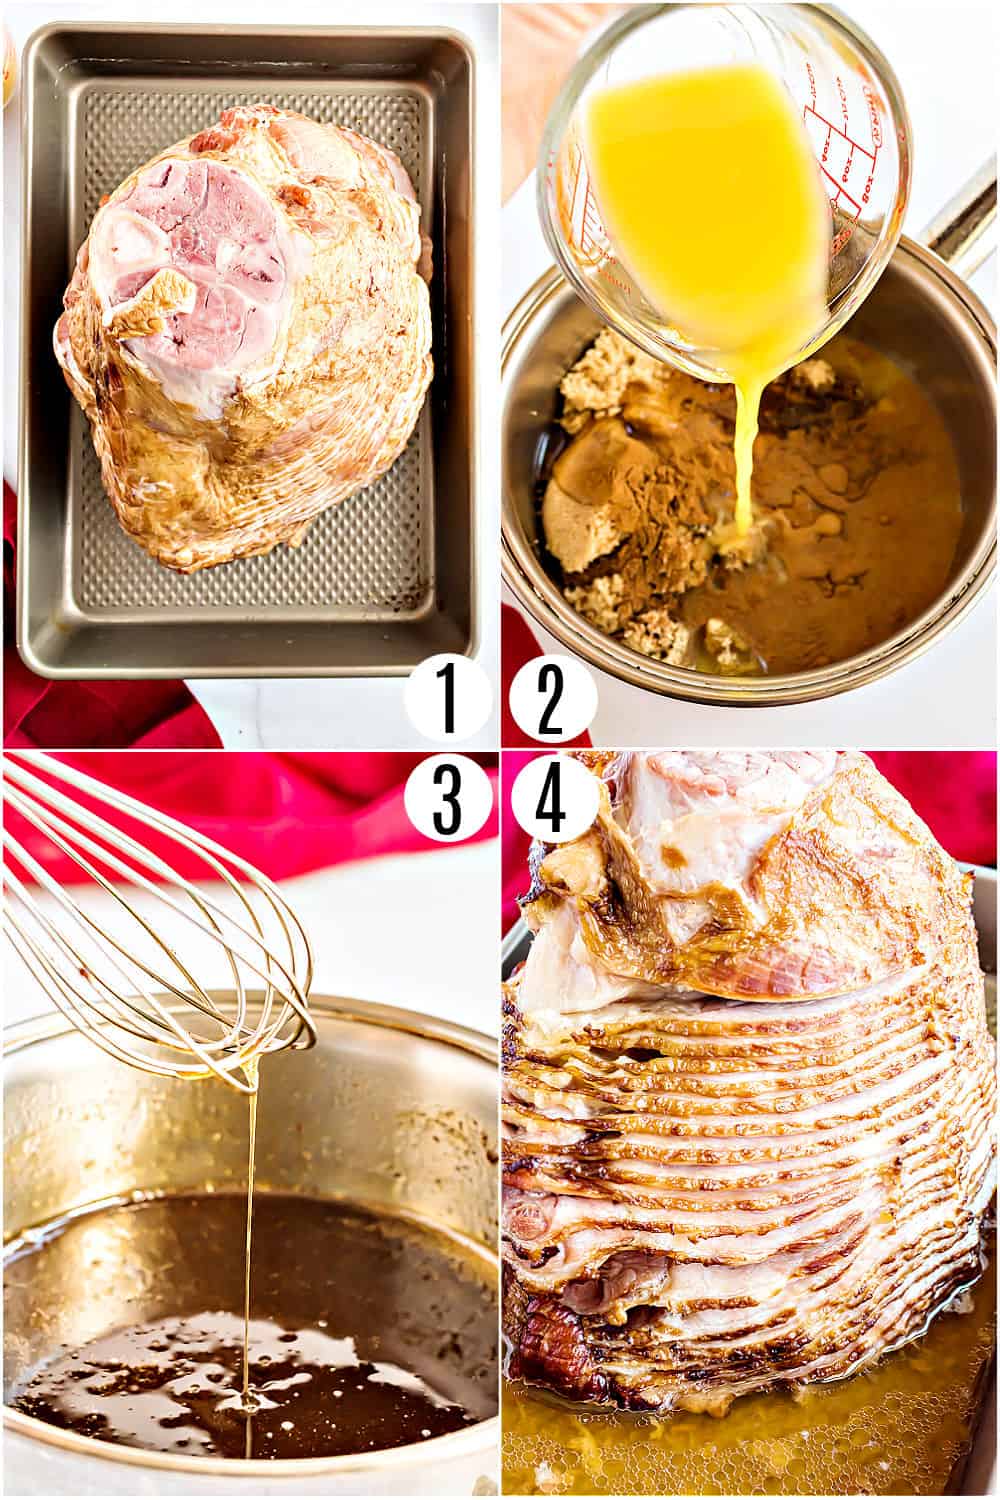 Step by step photos showing how to bake a ham in the oven with a brown sugar glaze.